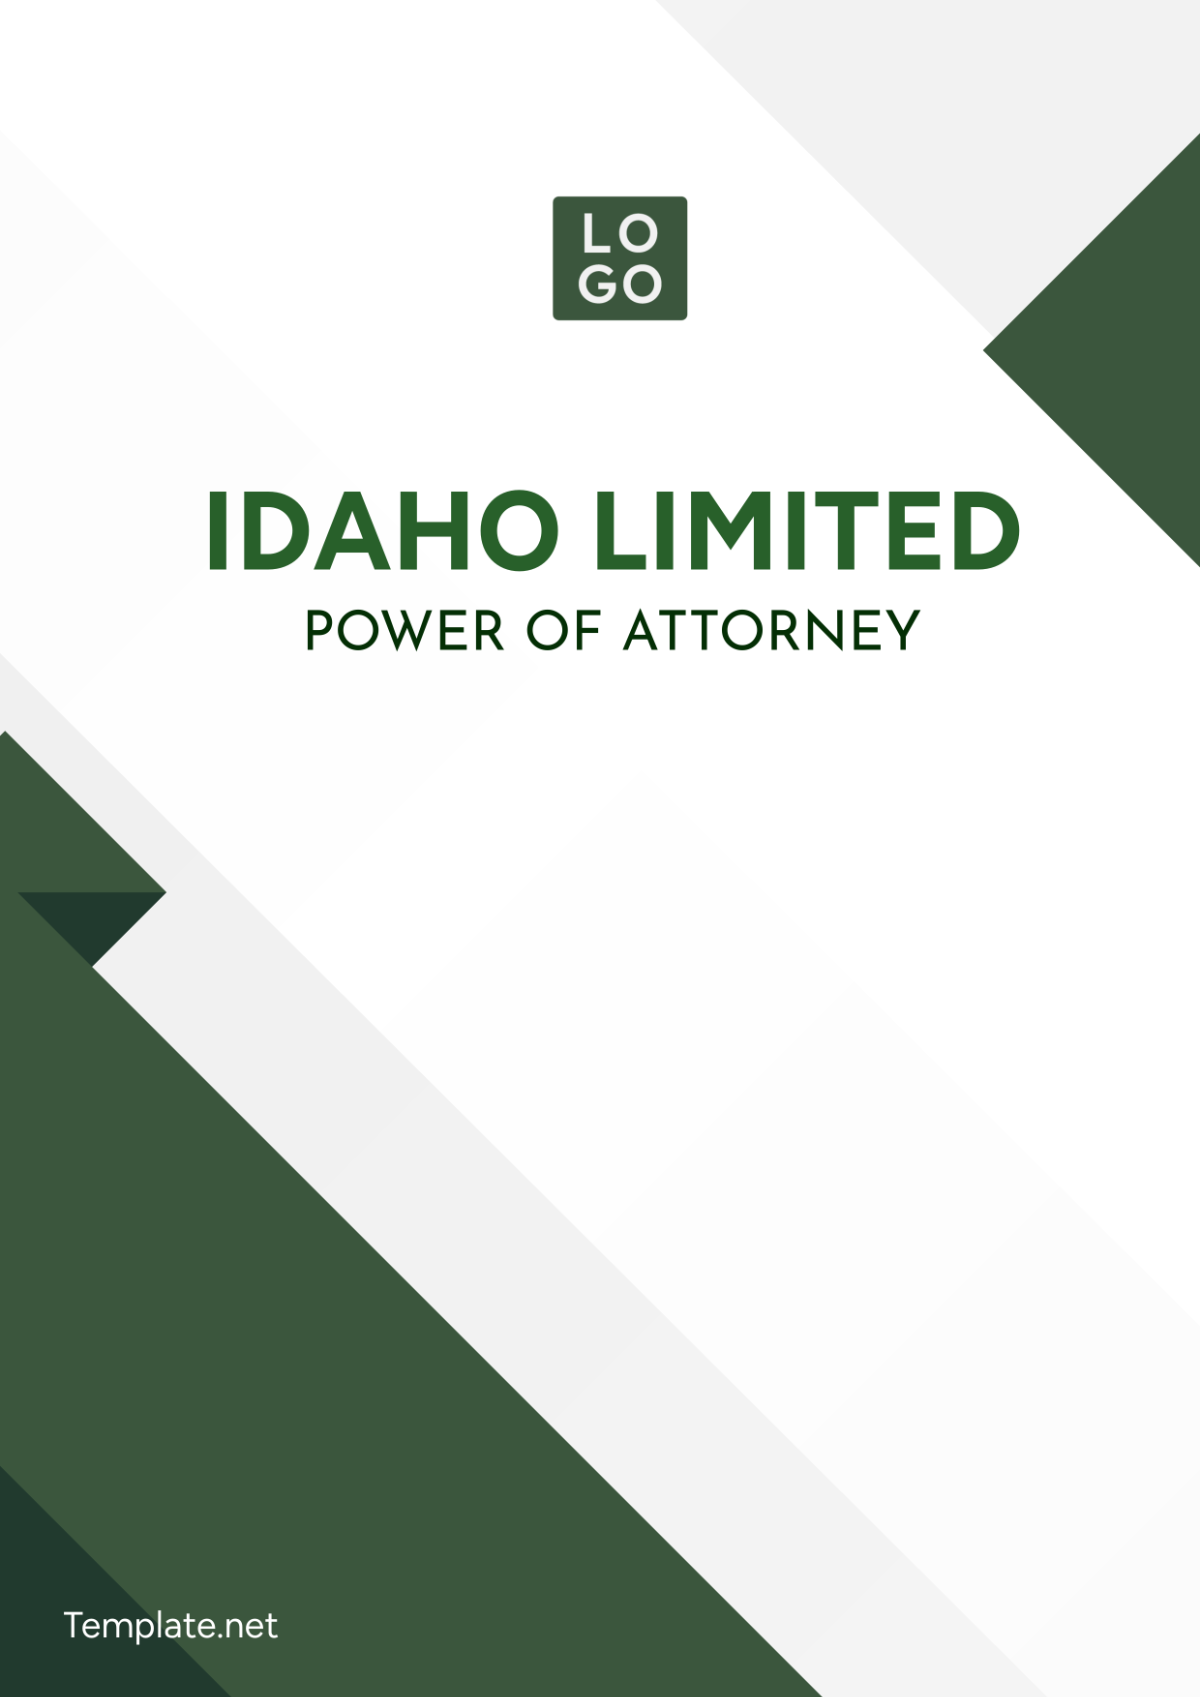 Idaho Limited Power of Attorney Template